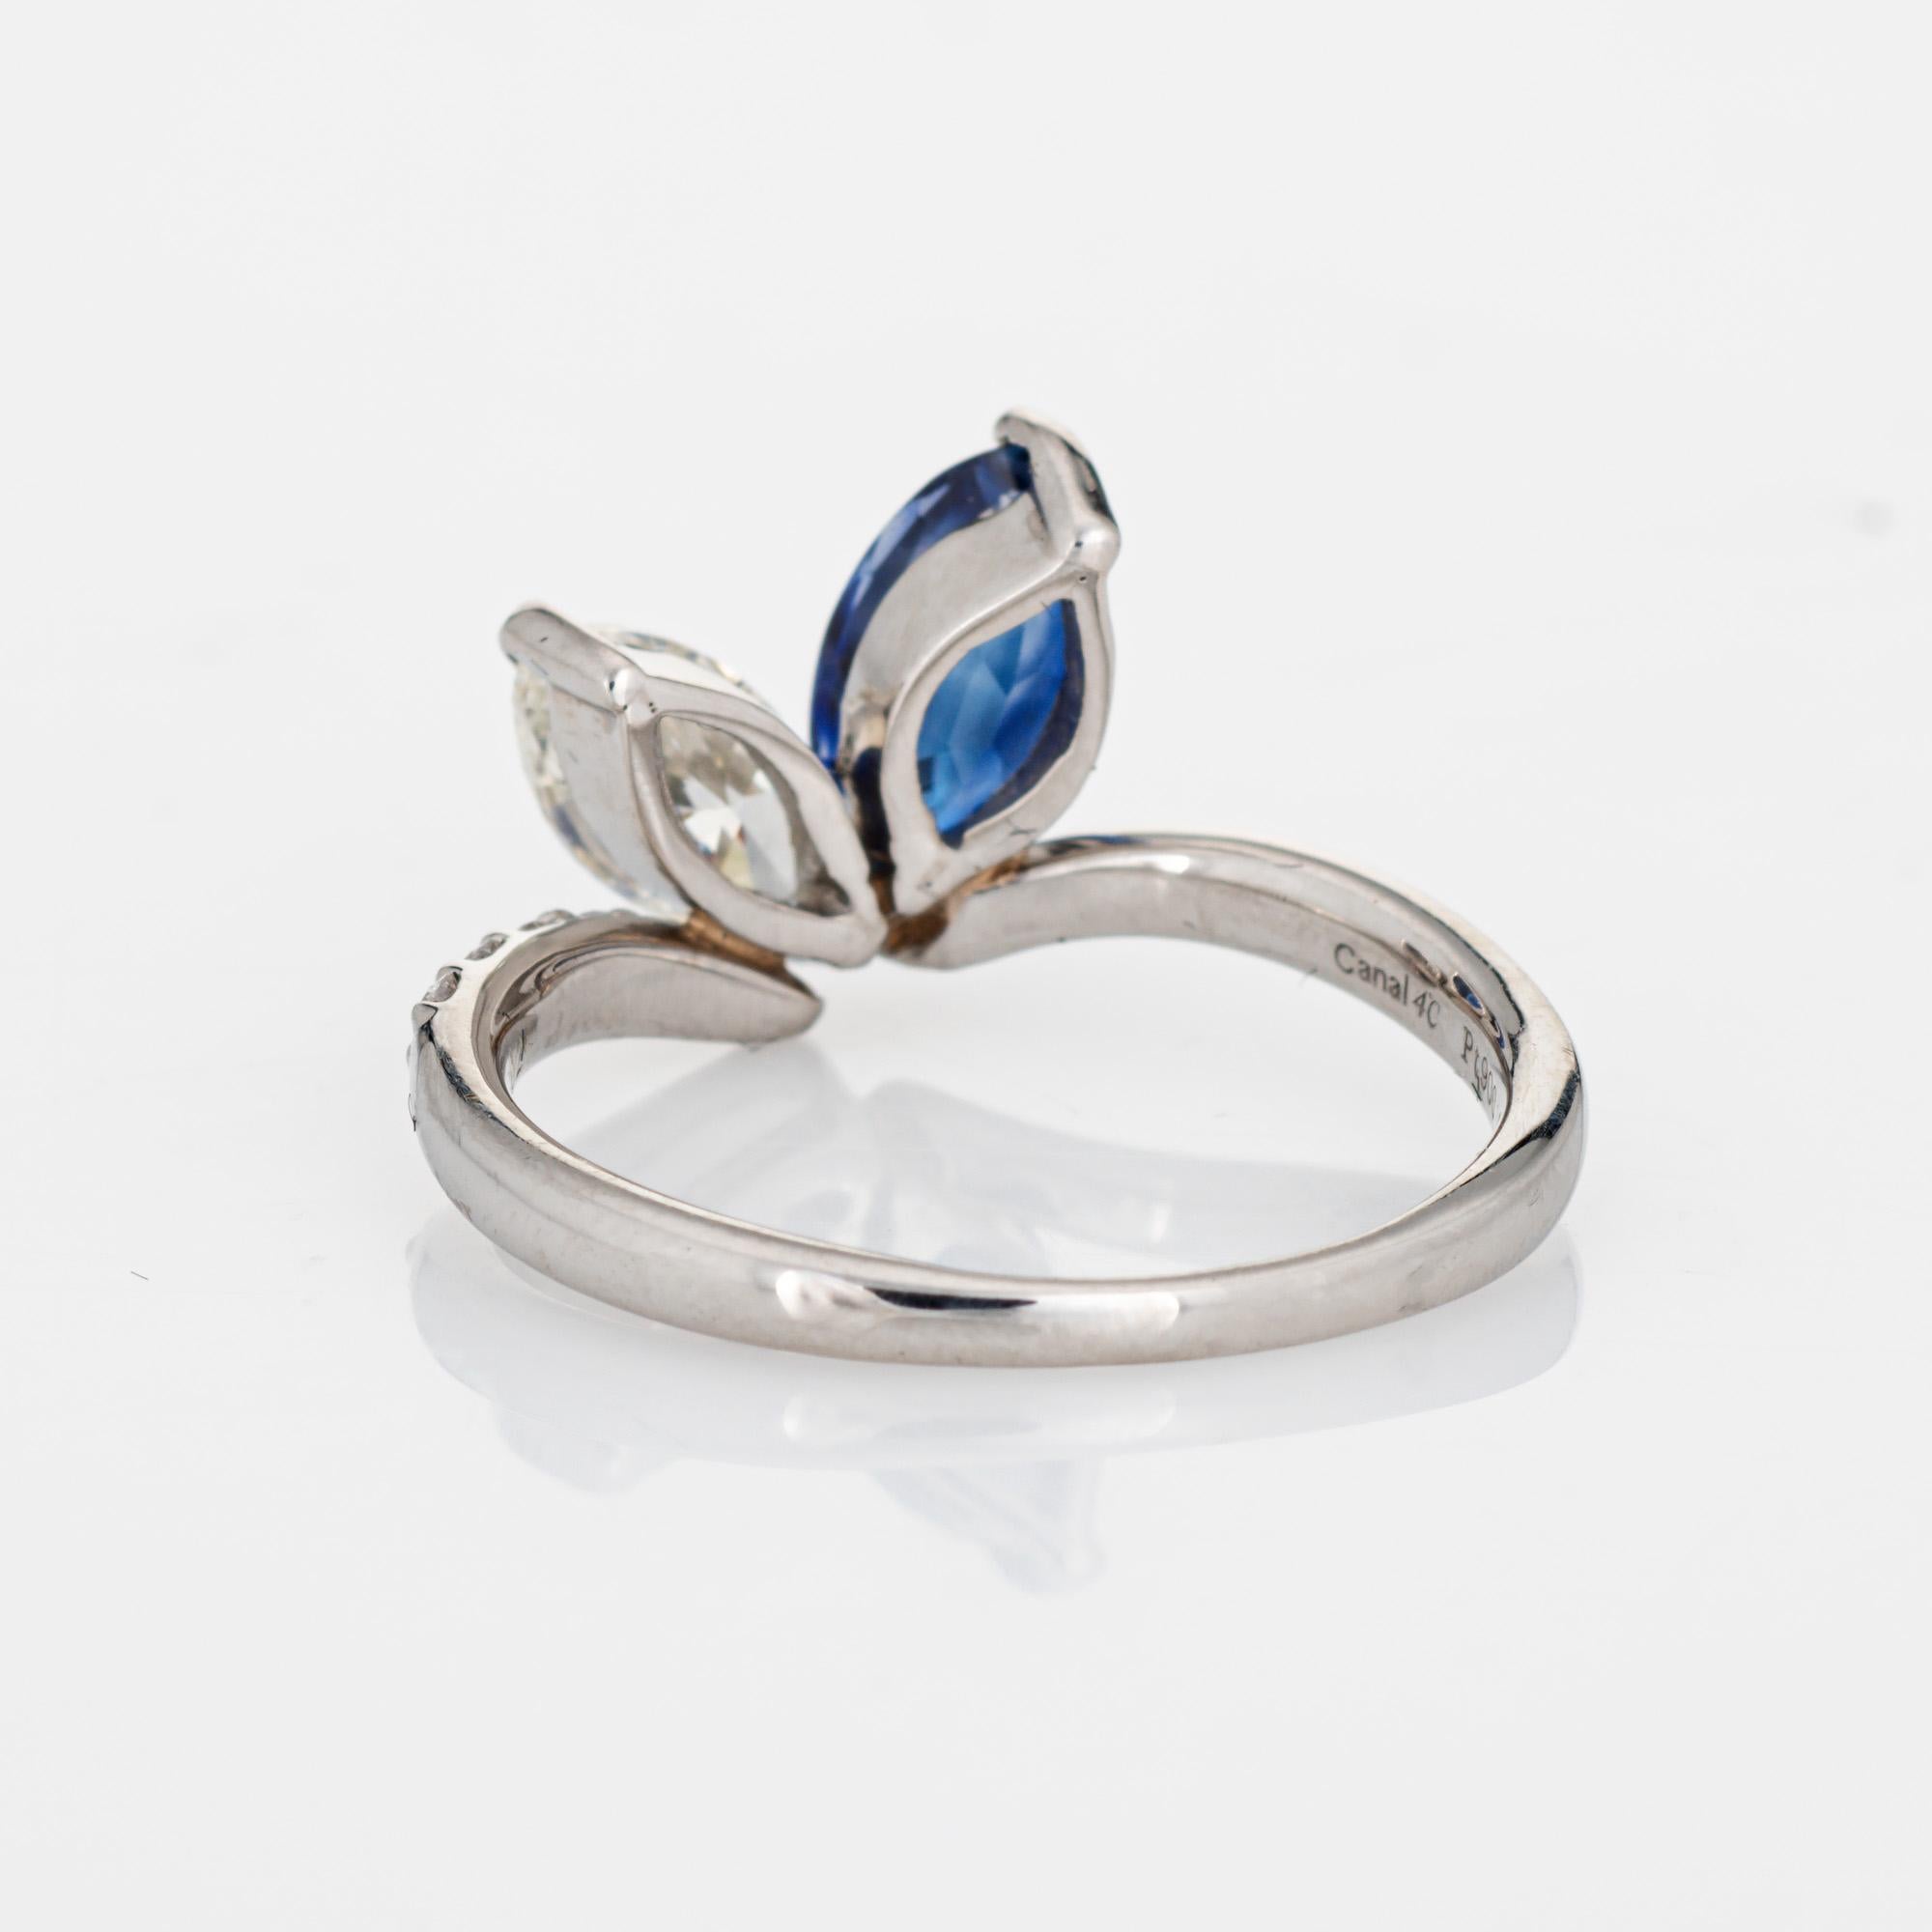 Sapphire Diamond Ring Moi et Toi Platinum Sz 6 Marquise Engagement Jewelry In Good Condition For Sale In Torrance, CA